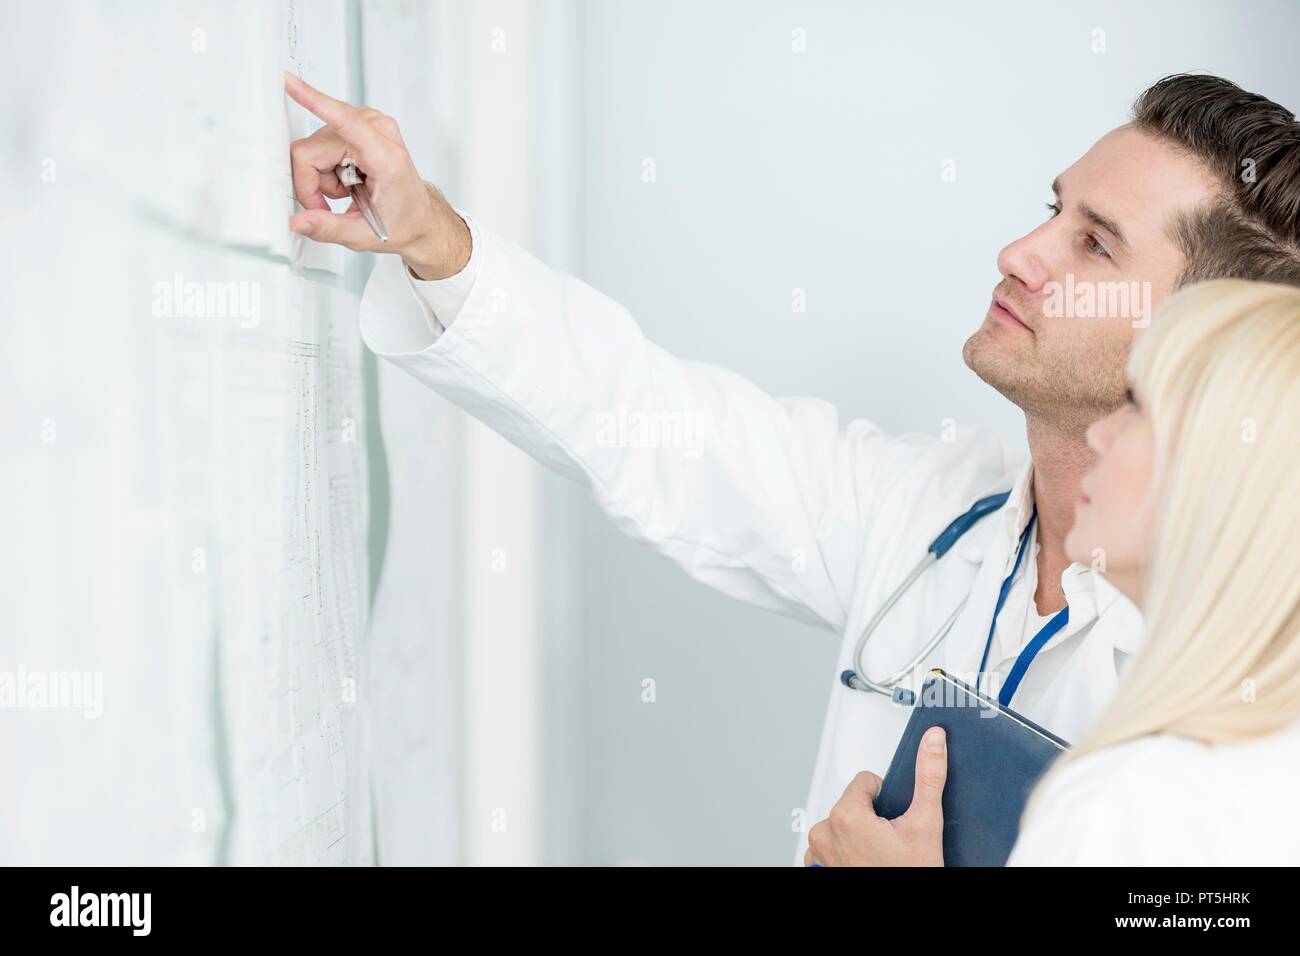 Portrait of mature male and female doctors inspecting white board. Stock Photo